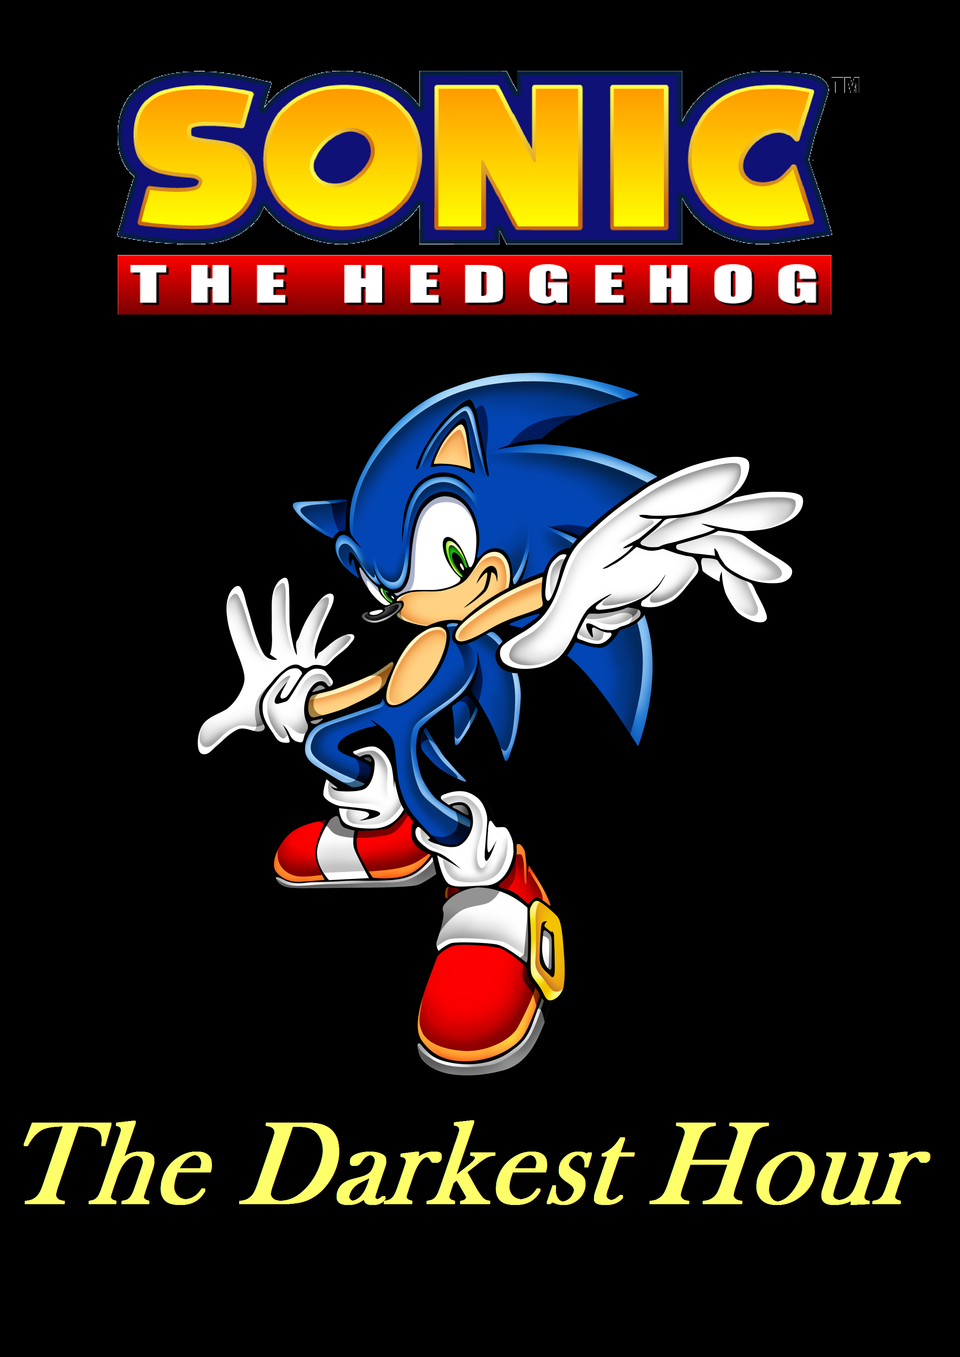 Sonic the Hedgehog - The Darkest Hour (Title Page)